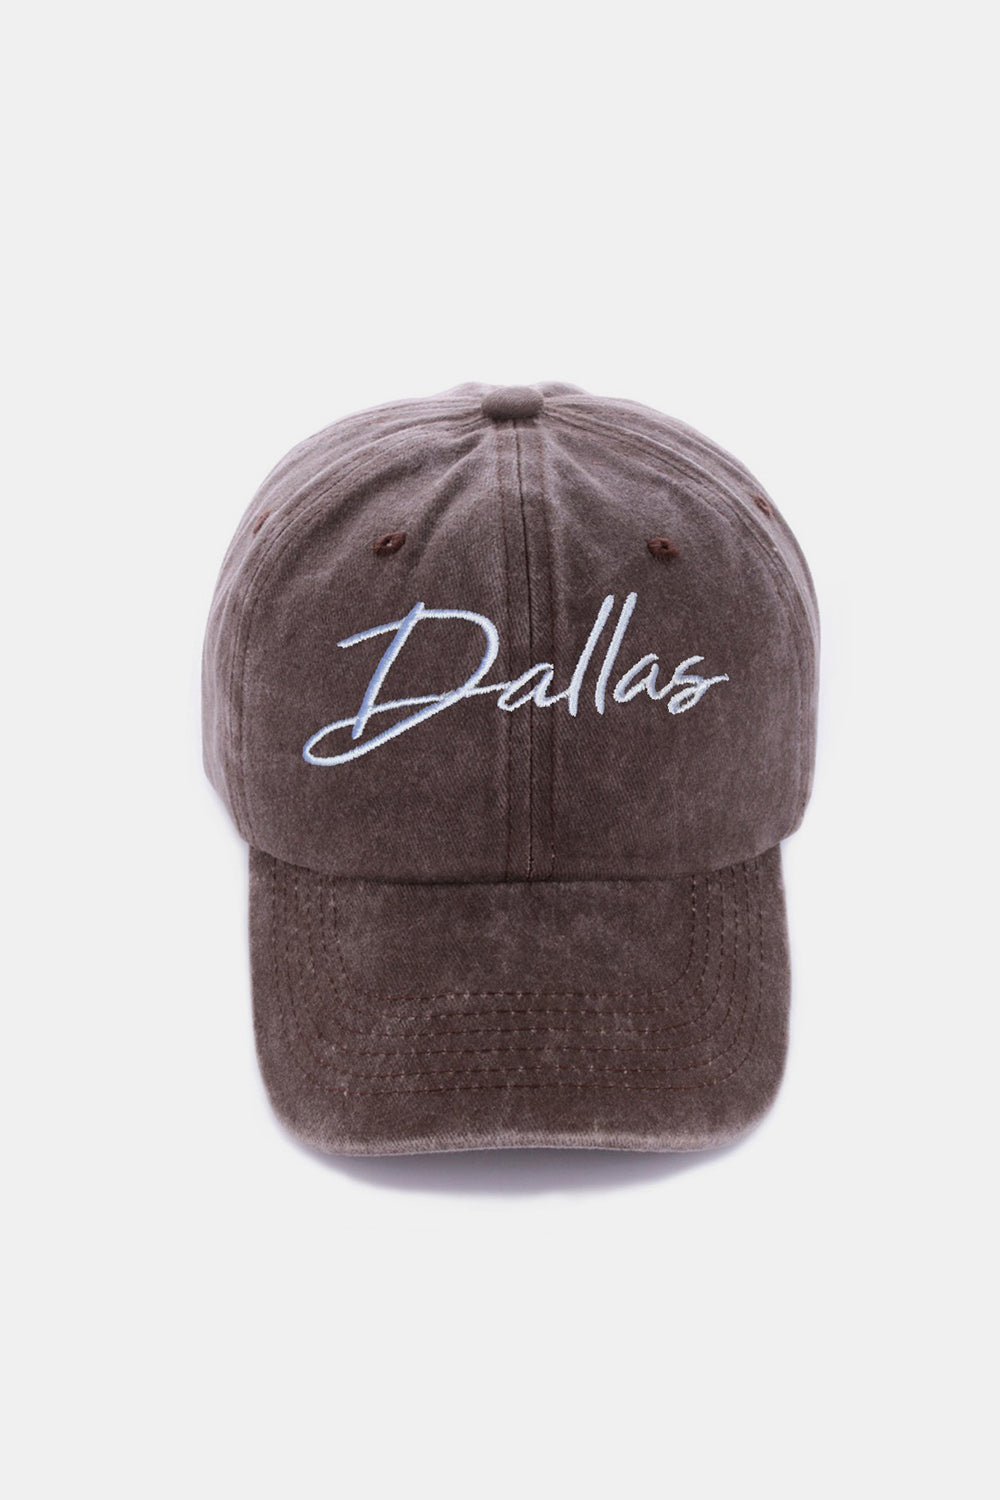 Zenana Washed DALLAS Embroidered Baseball Cap Sunset and Swim Dallas Brown One Size 